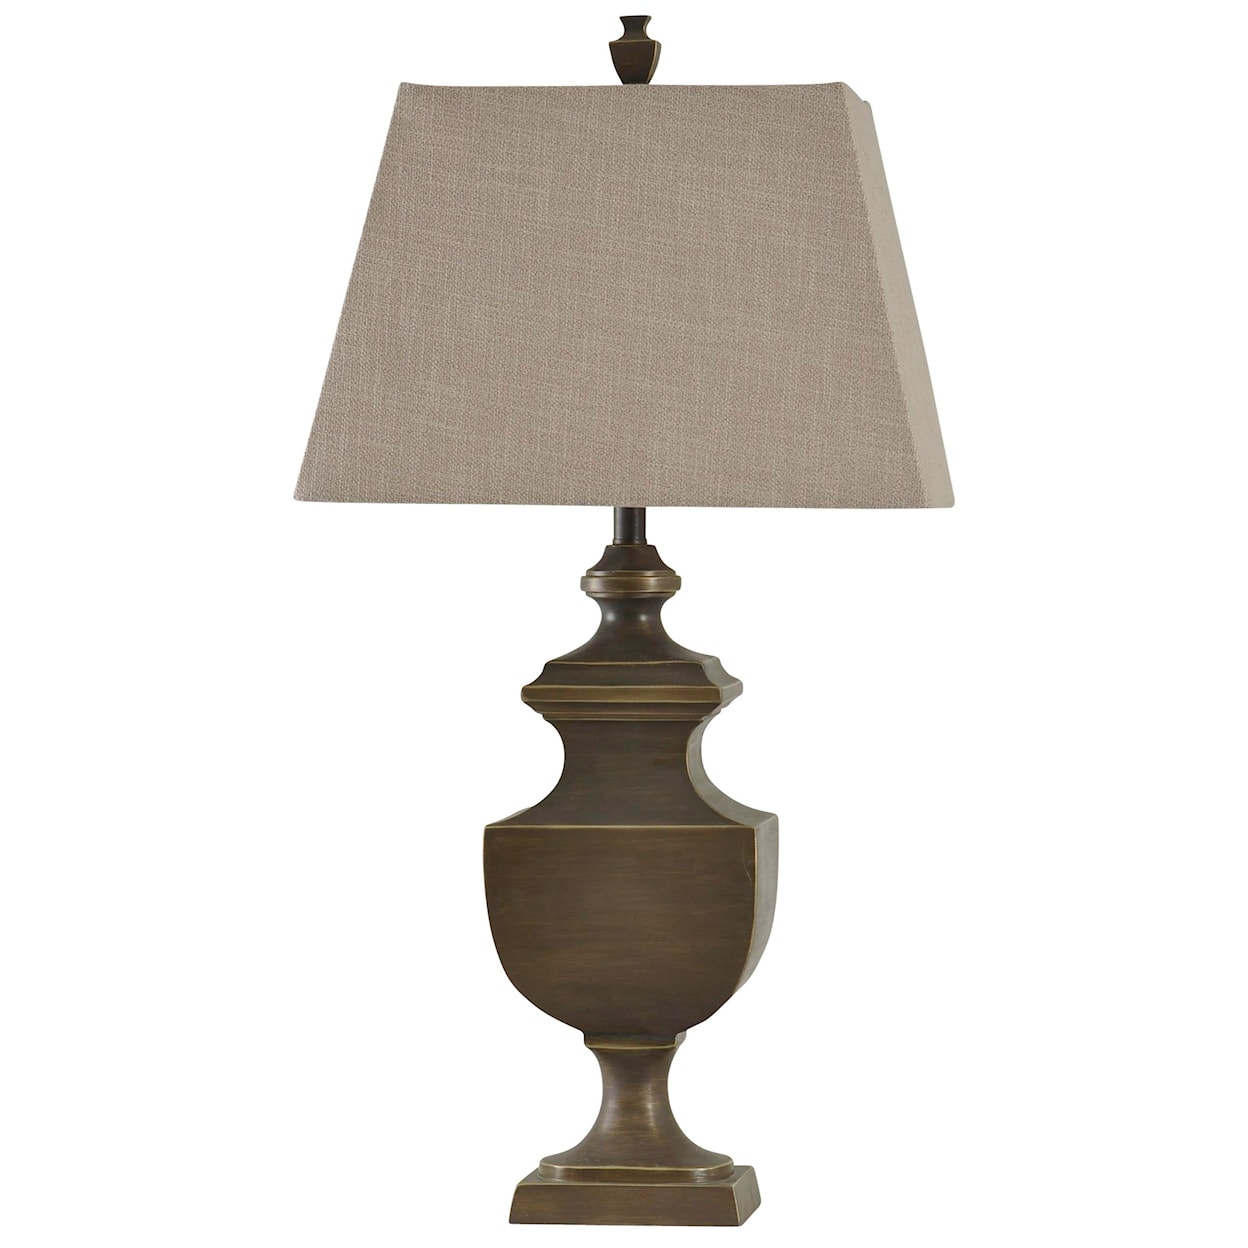 StyleCraft Lamps Classic Traditional Table Lamp